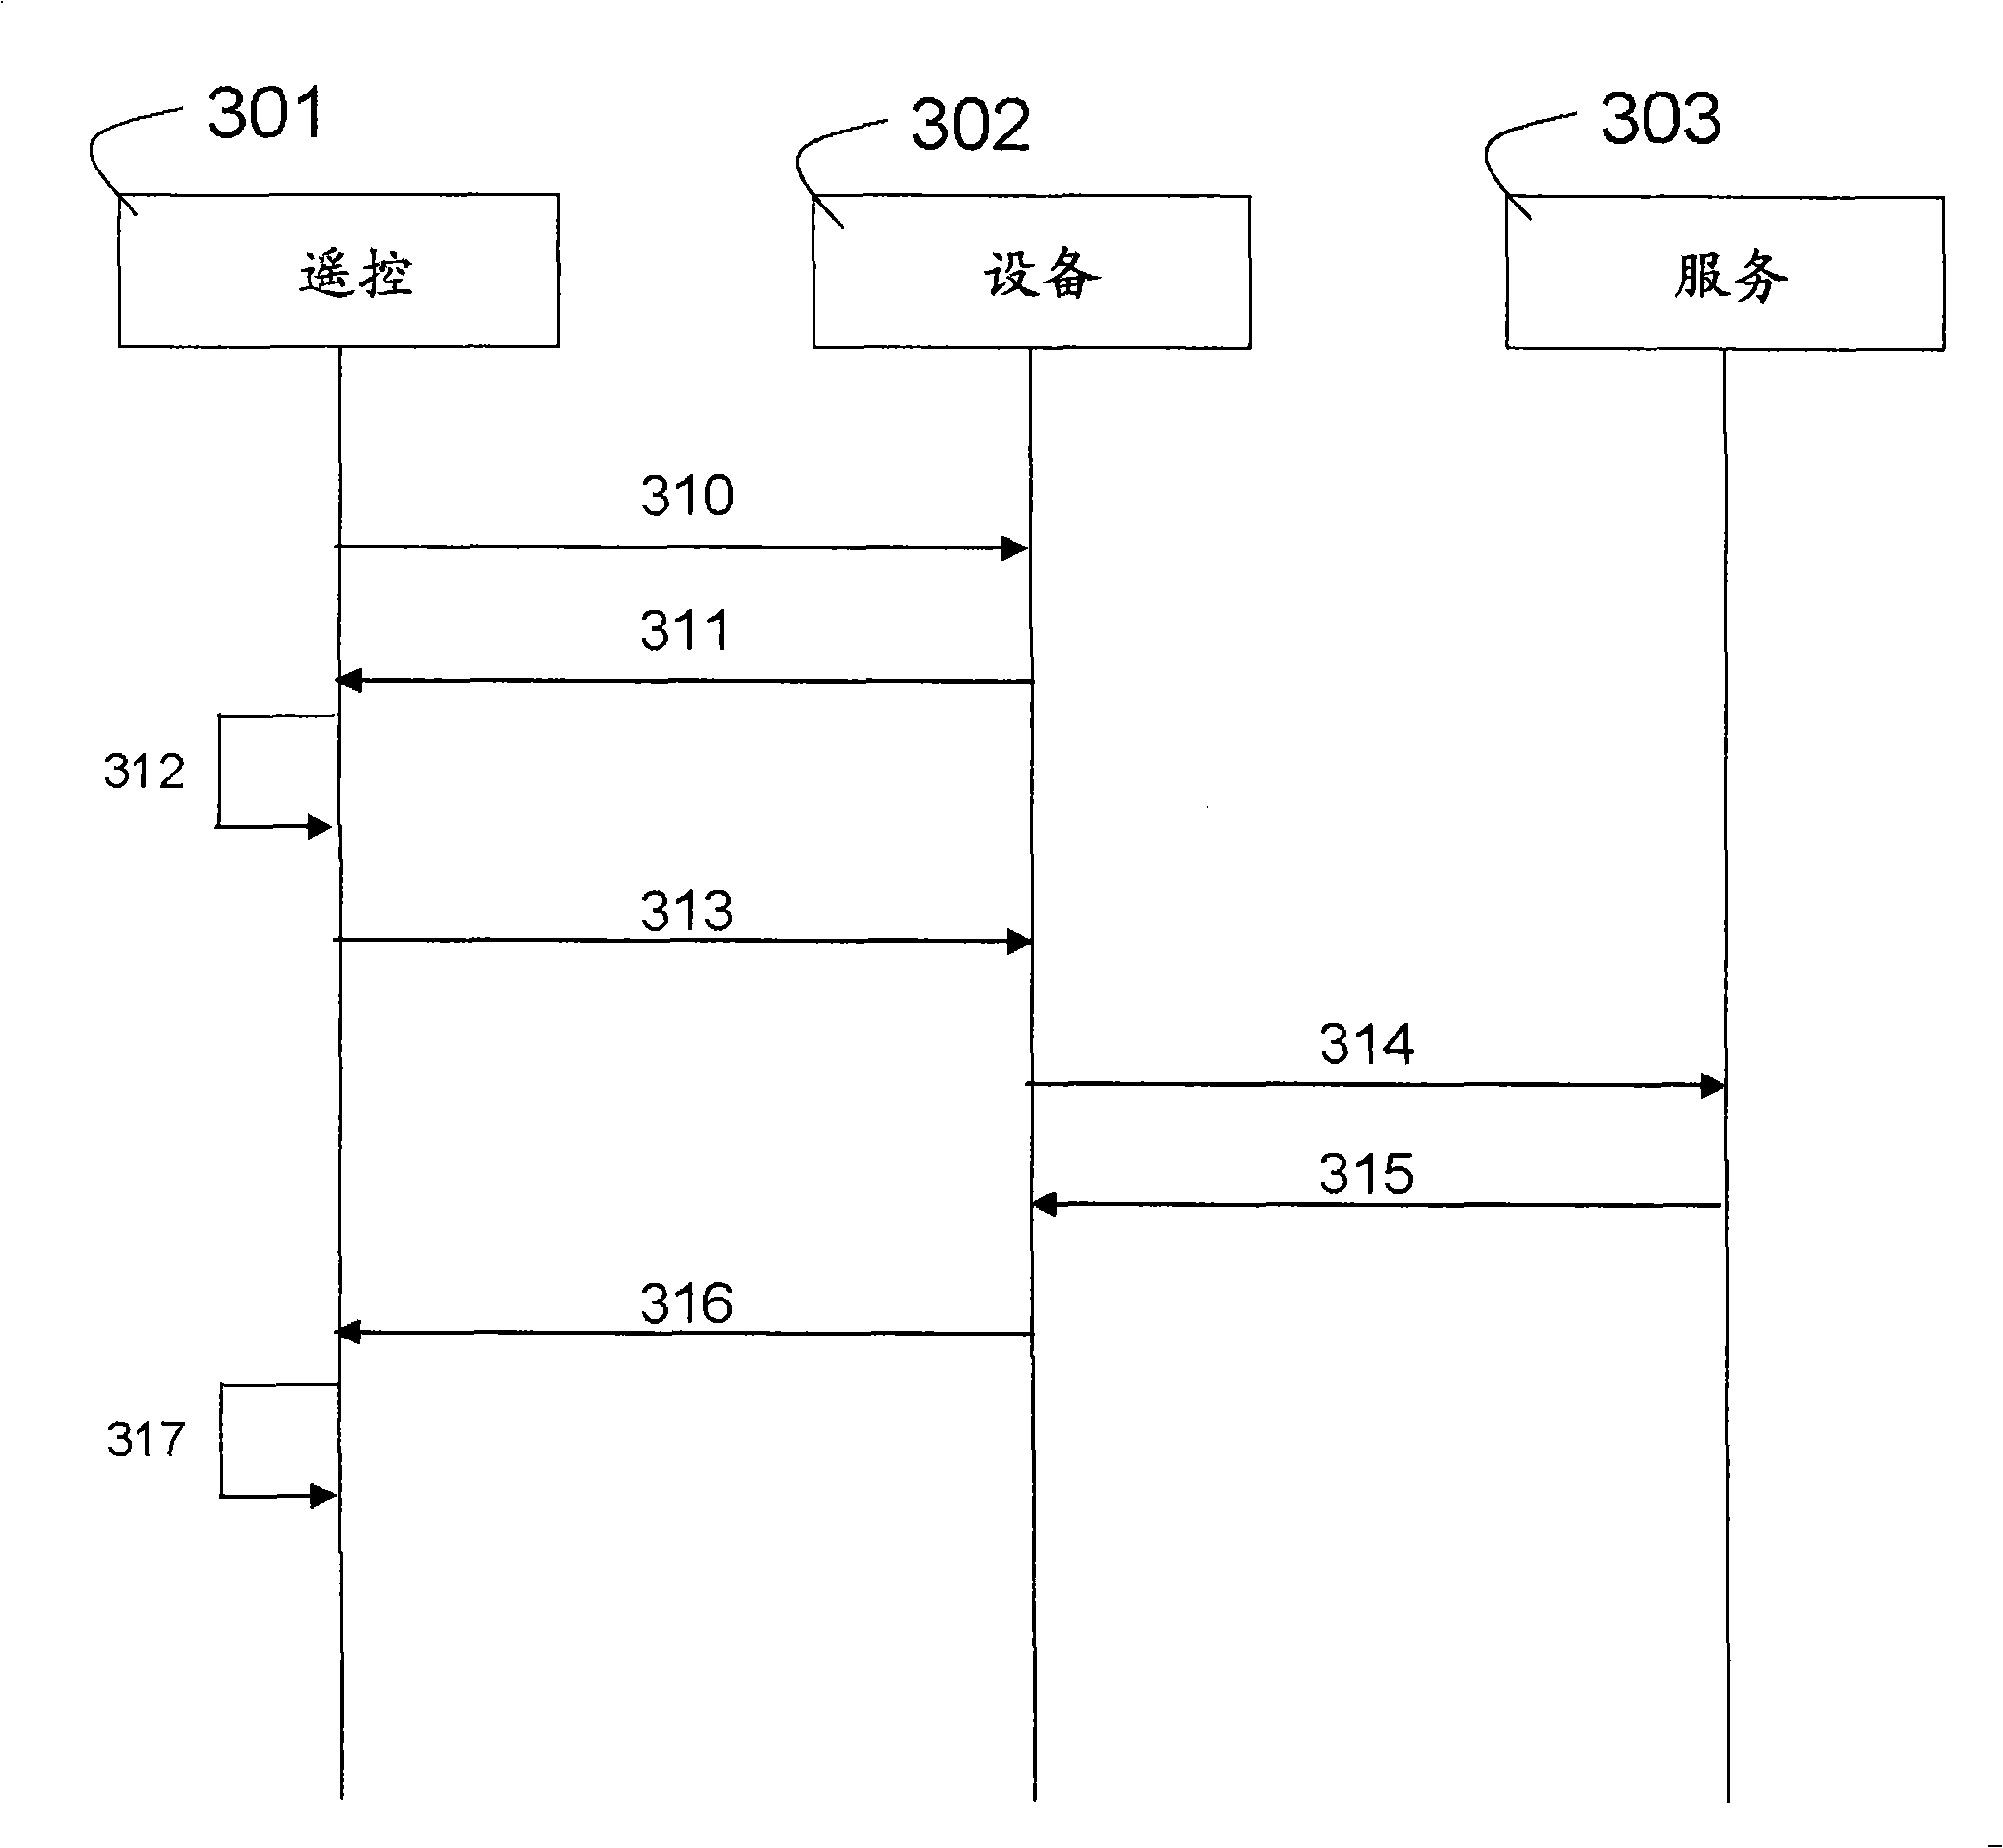 Remote control for devices with connectivity to a service delivery platform